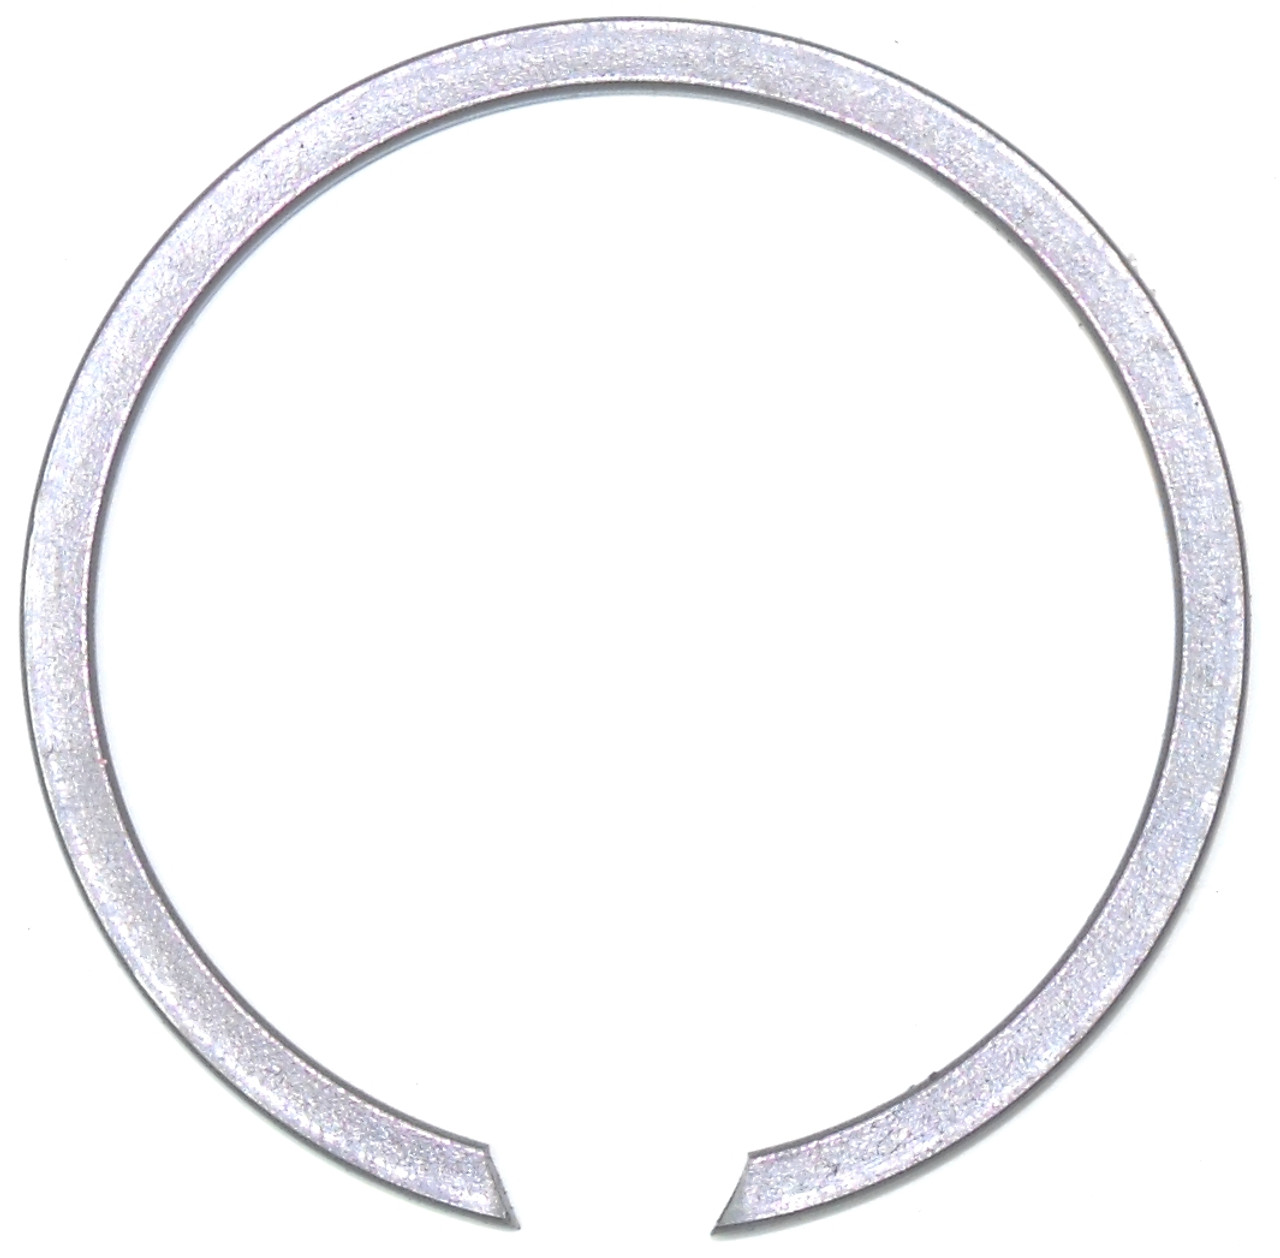 4L80E Forward Clutch Piston Snap Ring (1990-UP)